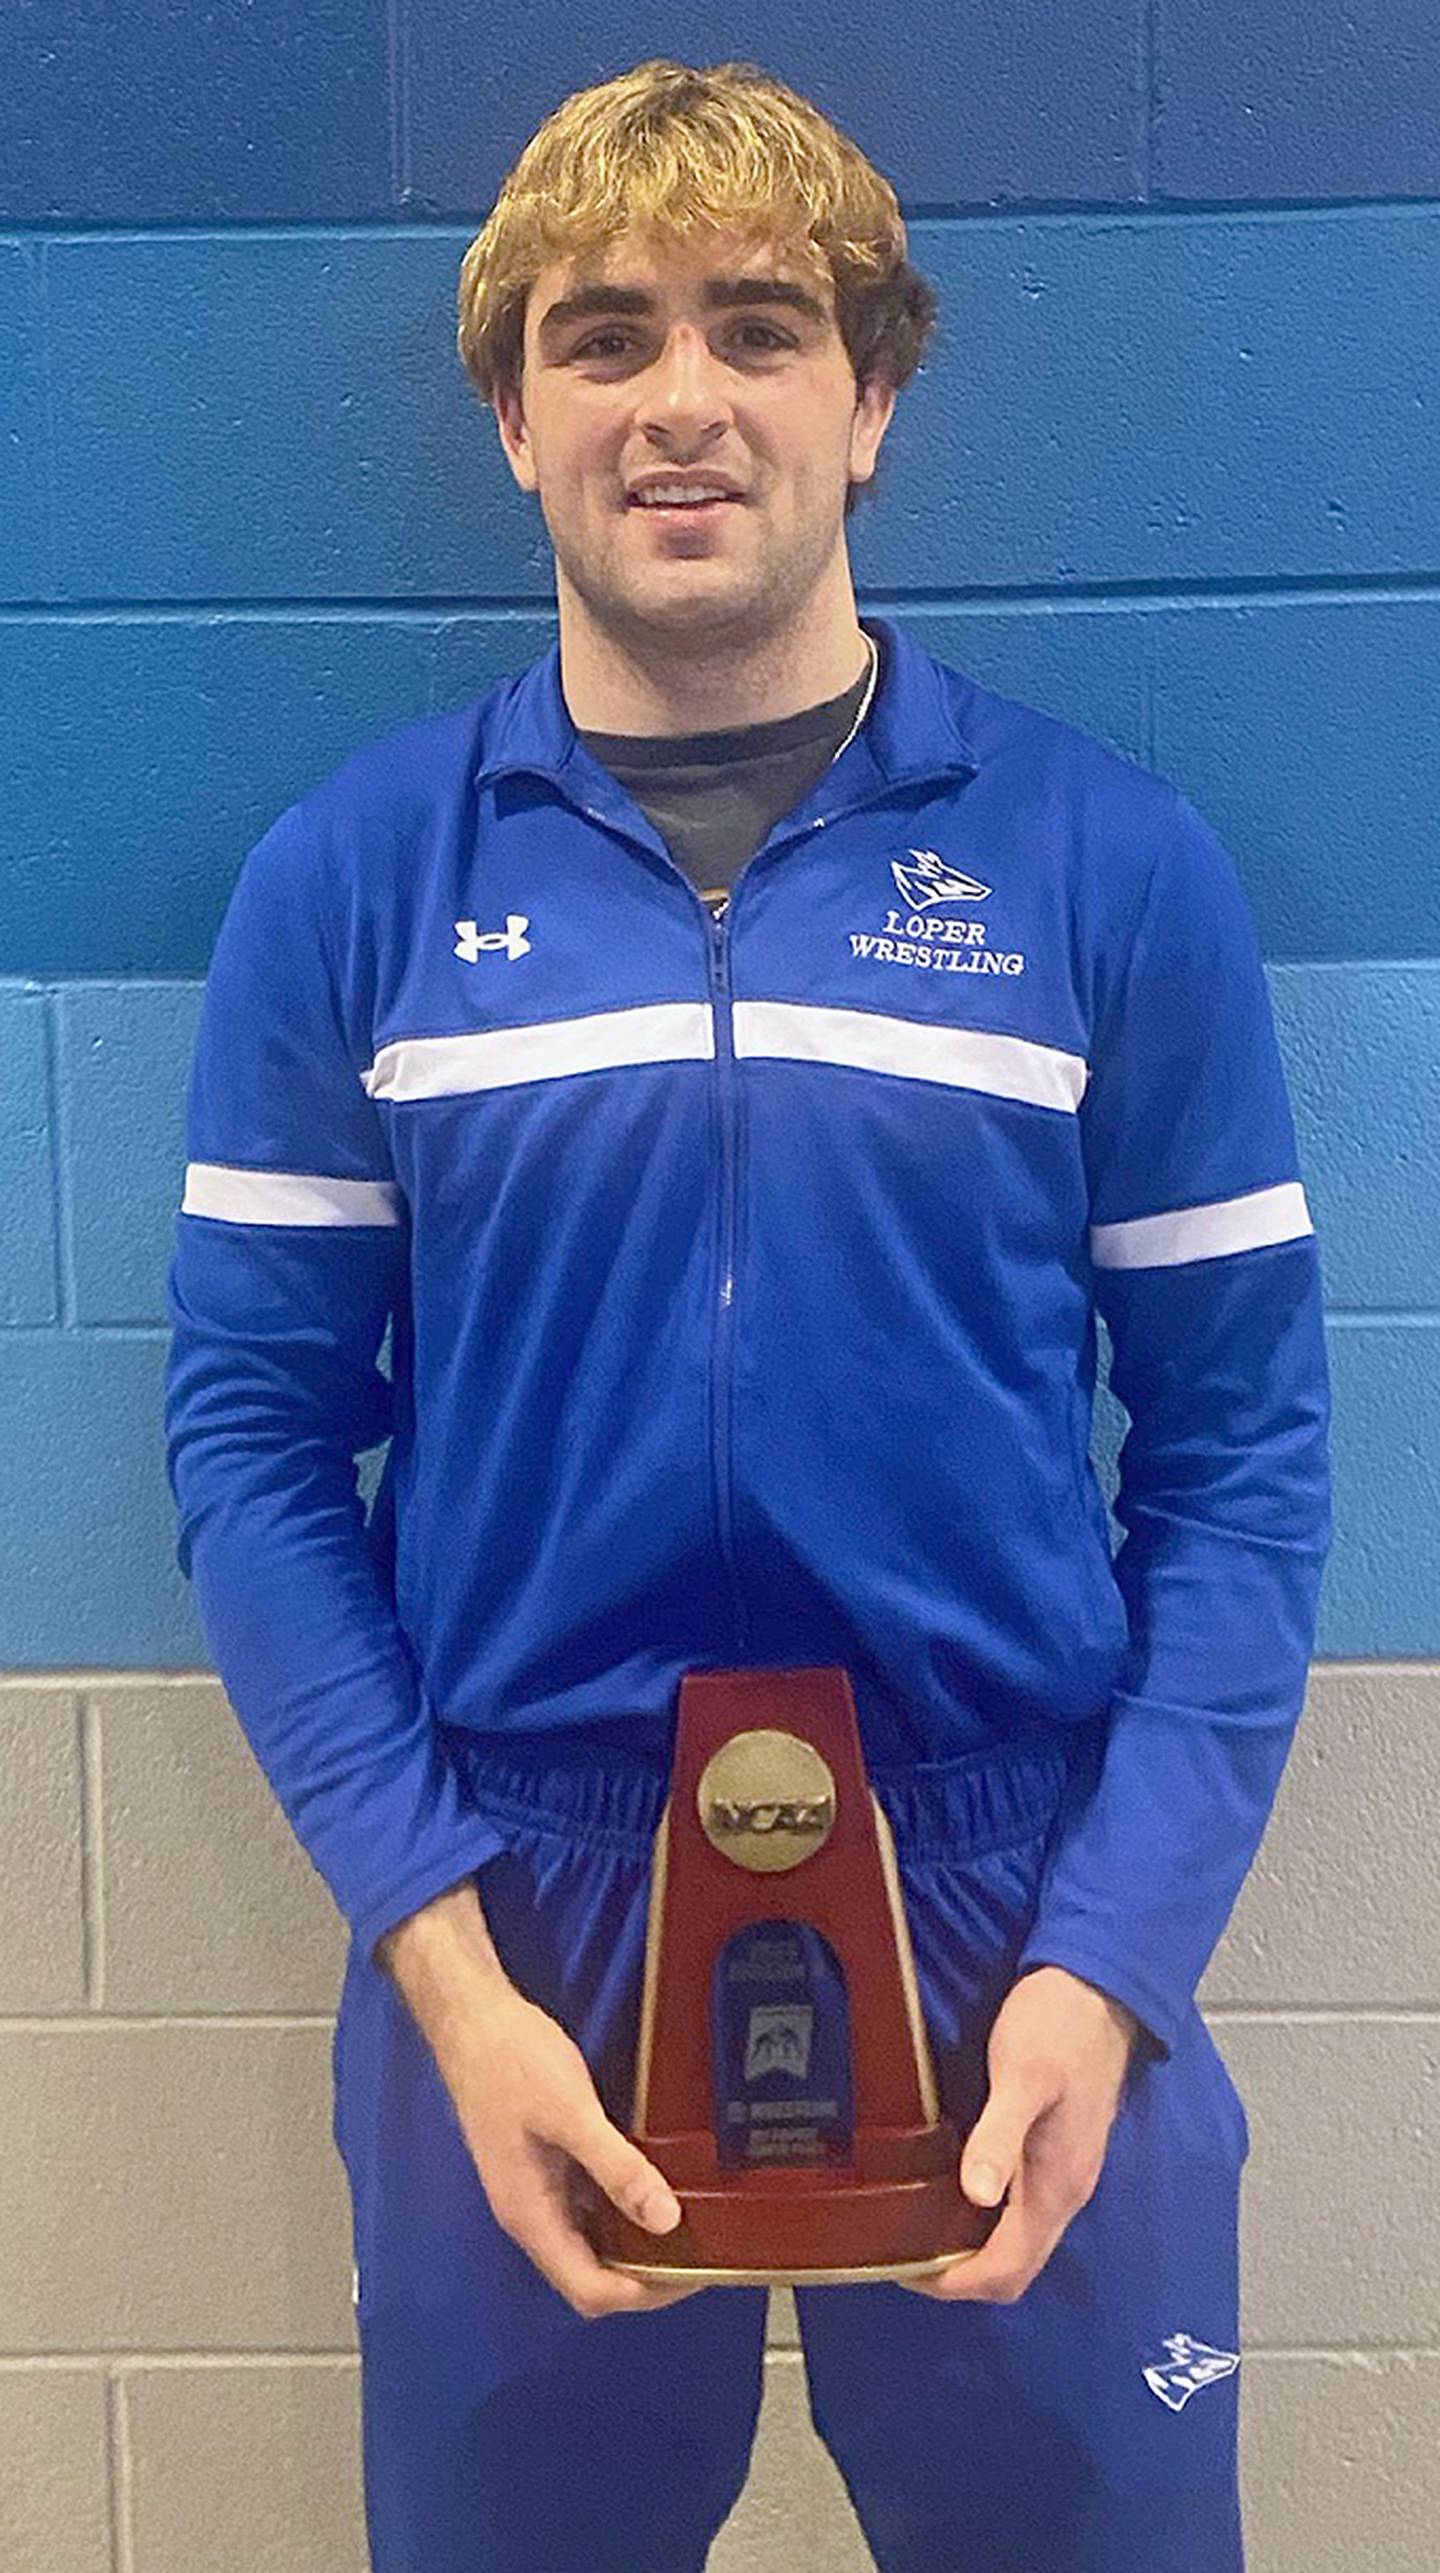 Jackson Kinsella is shown with his All-American plaque after placing fourth in the NCAA Division II wrestling championships. Kinsella is a 2021 graduate of Creston Community High School.